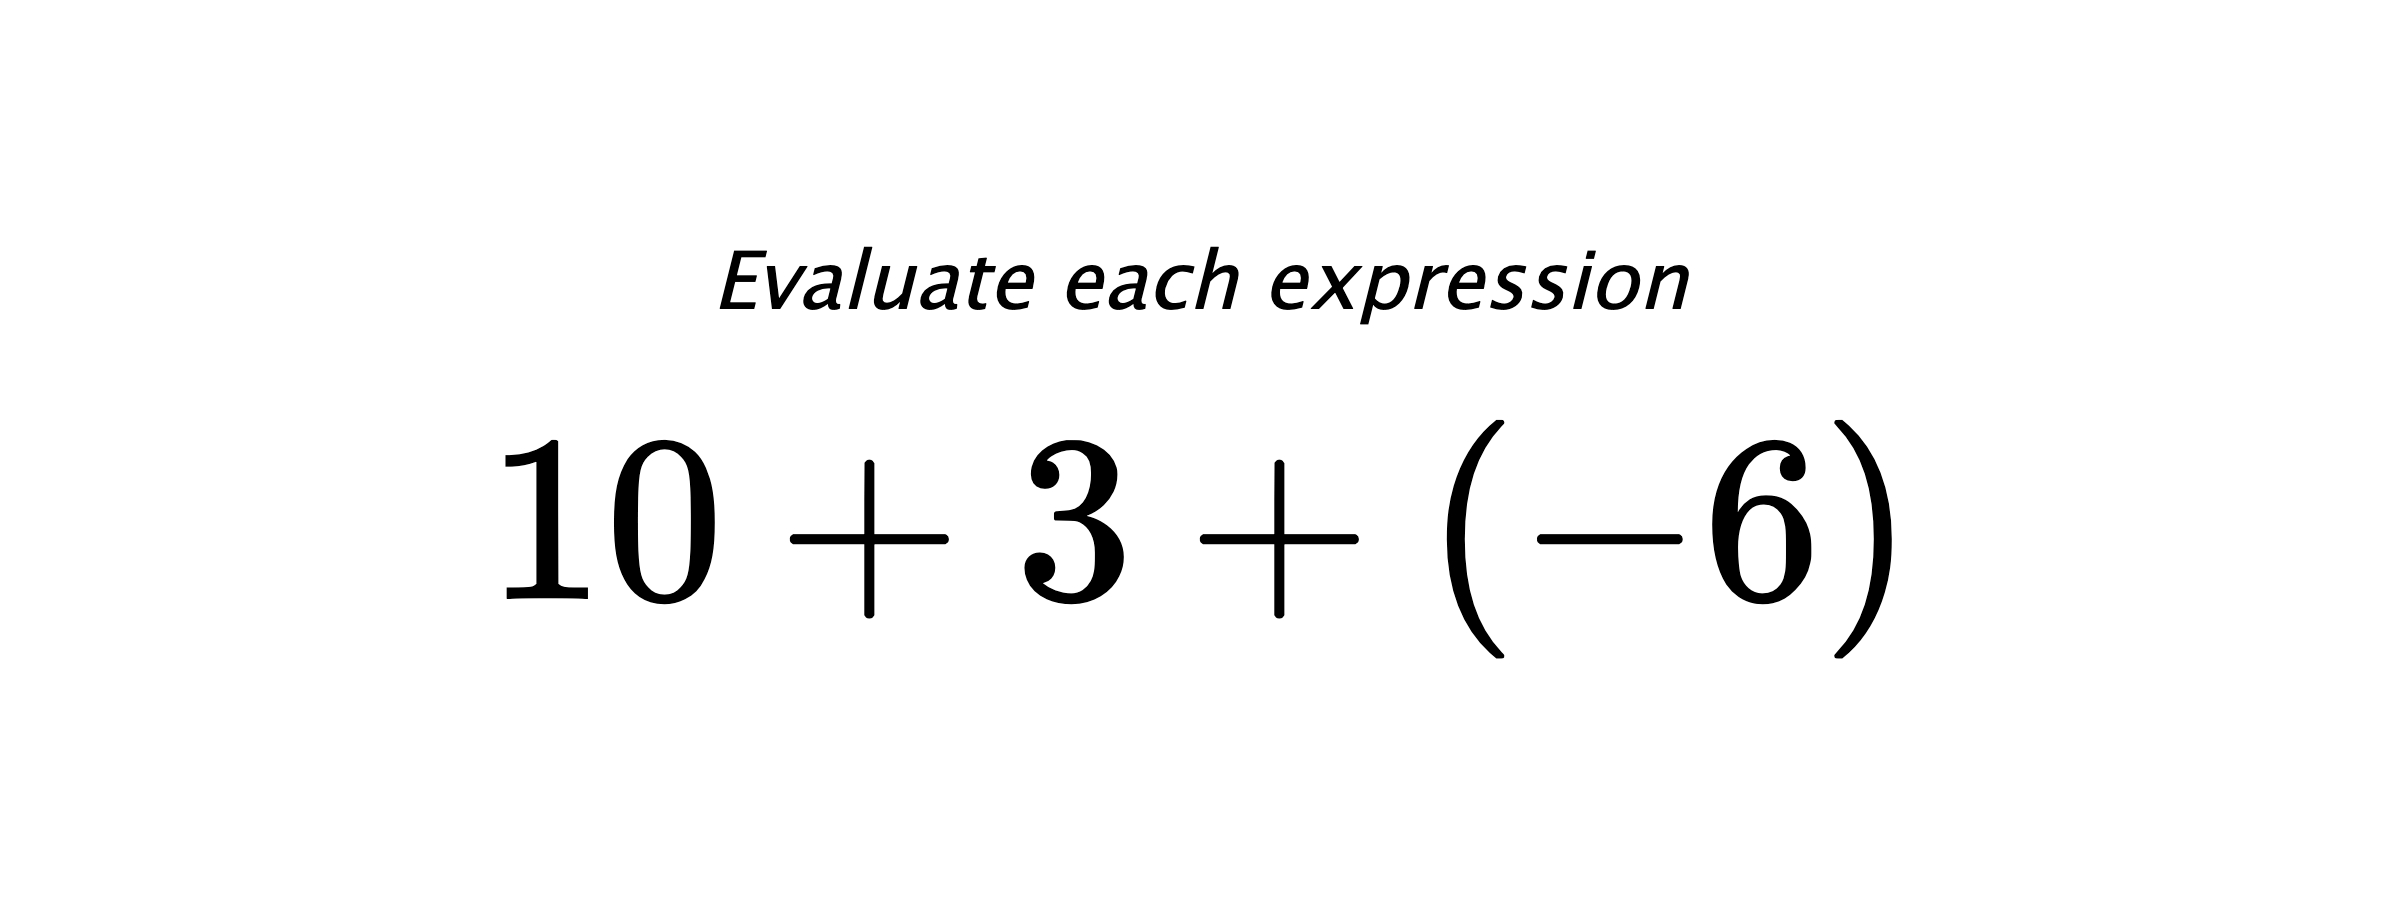 Evaluate each expression $ 10+3+(-6) $